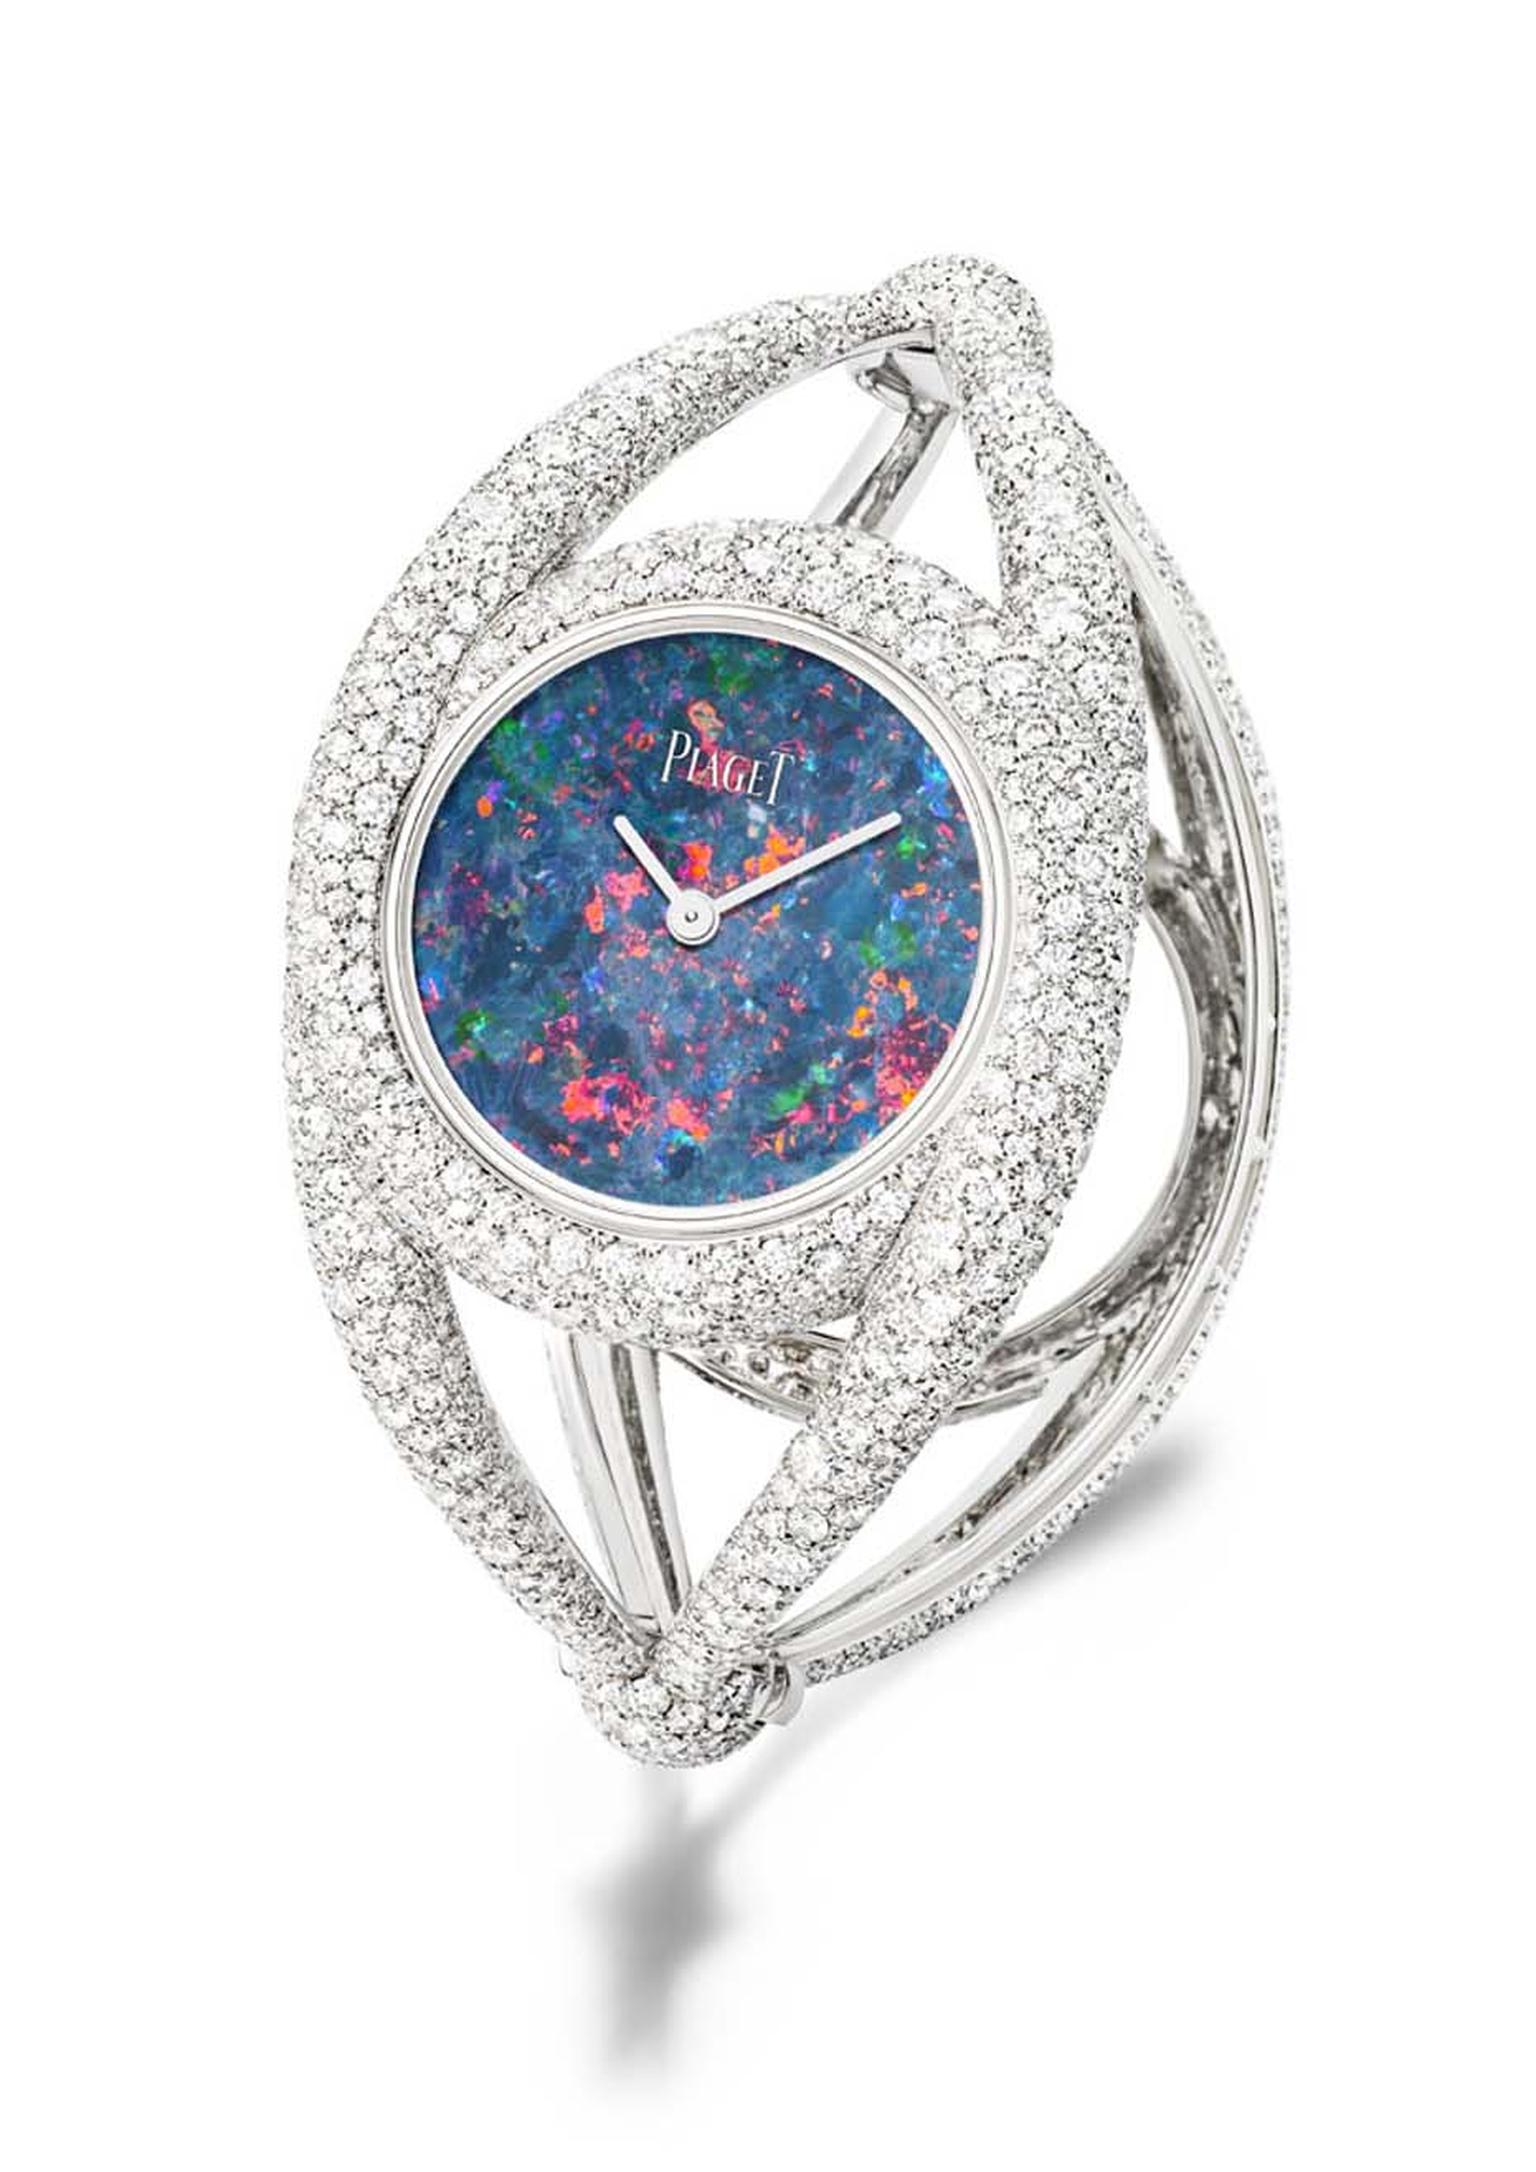 Extremely Piaget collection watch featuring a natural blue opal stone dial surrounded by a snow-set mesh of 1,699 brilliant-cut diamonds totalling 20.50ct.